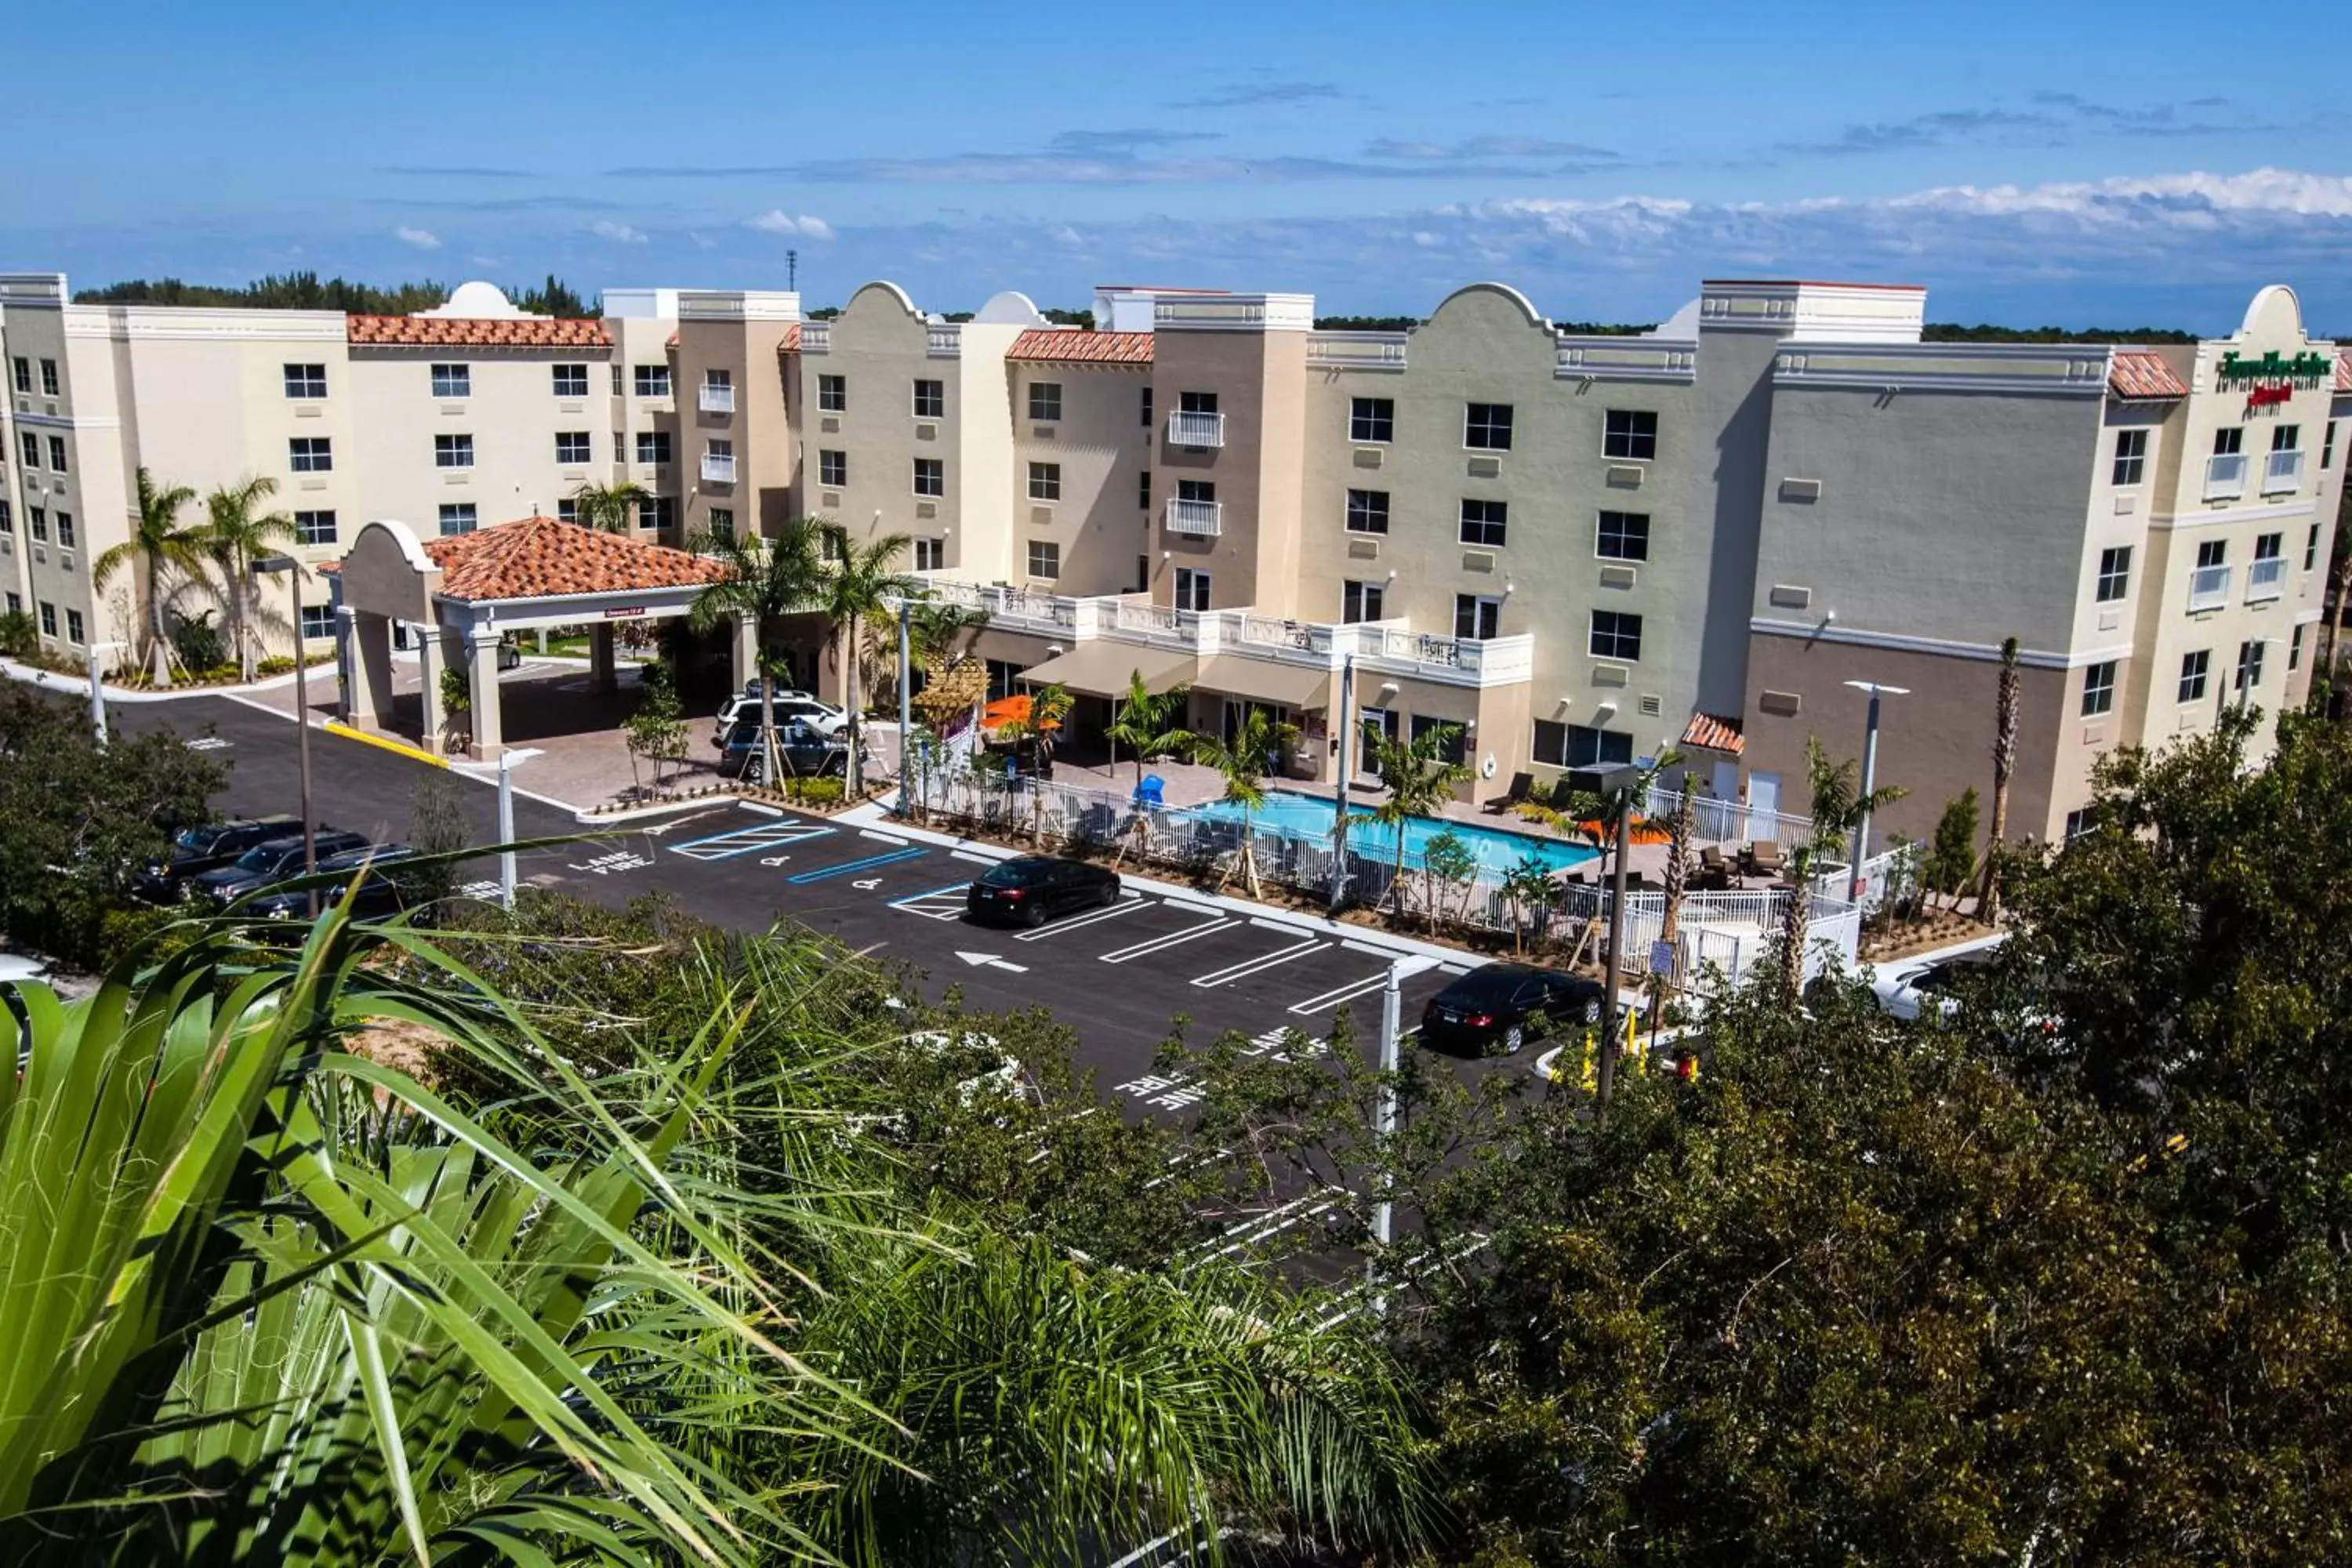 Property building in TownePlace Suites by Marriott Boynton Beach